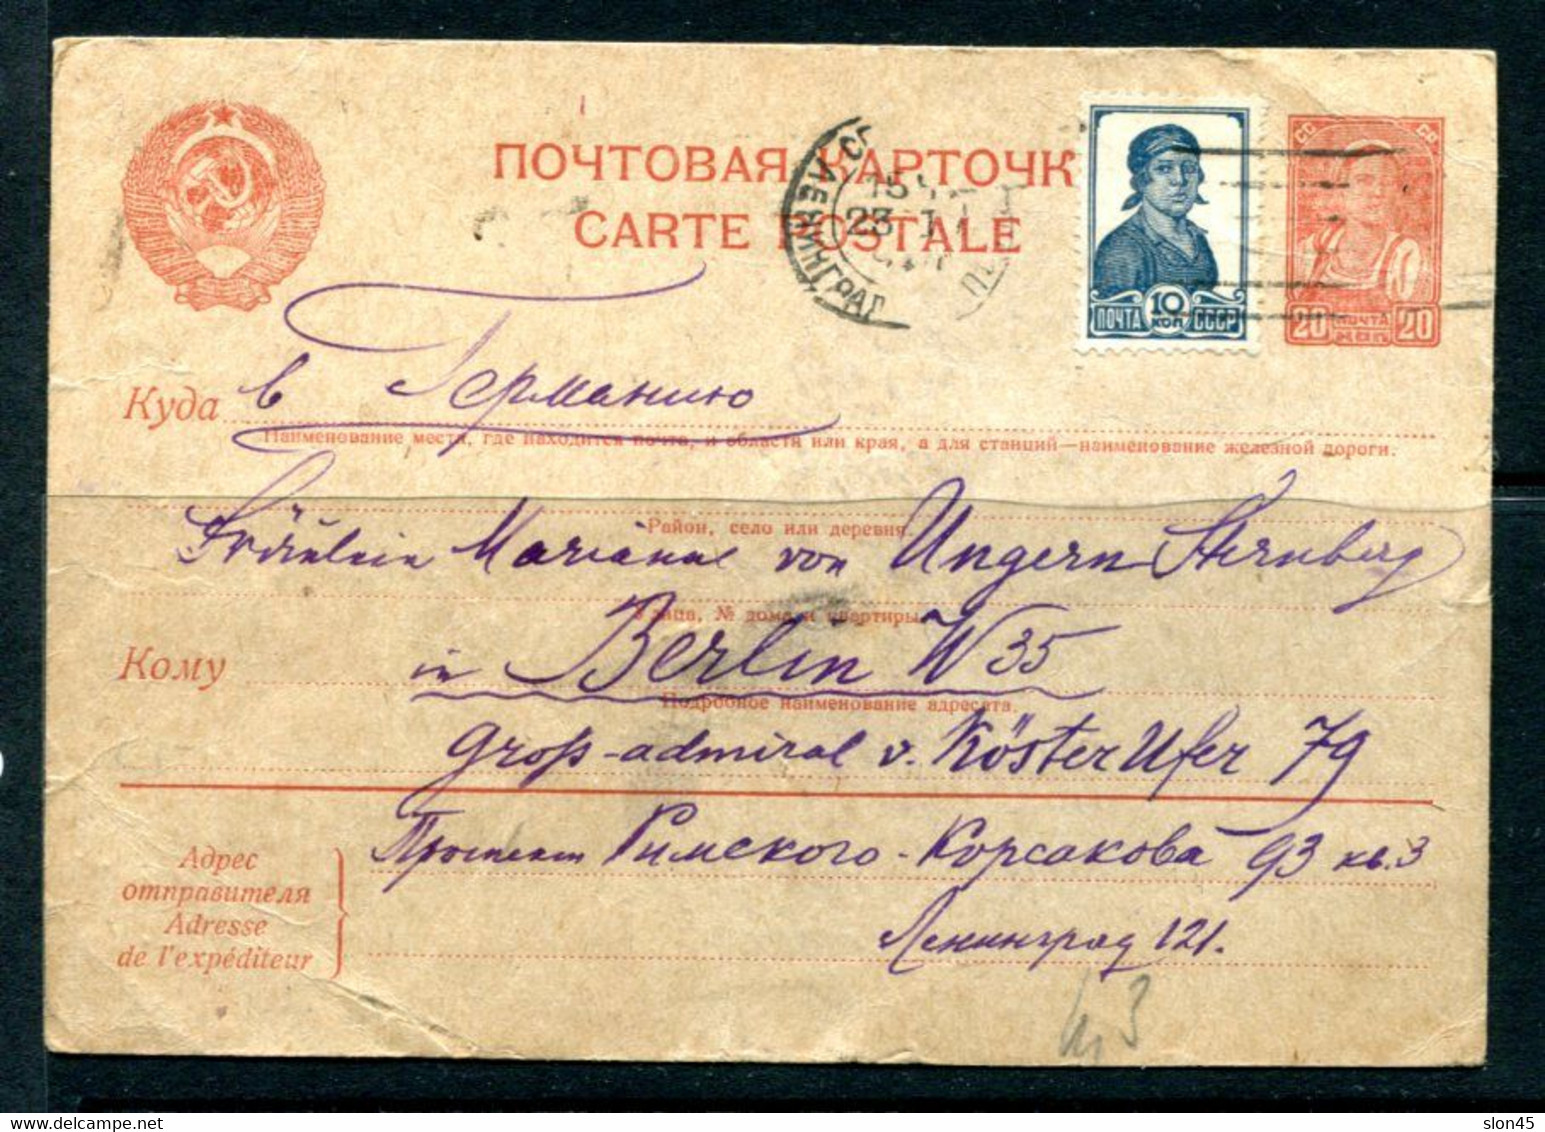 Russia 1940 Uprated PS Card Leningrad To Berlin Germany 14235 - Covers & Documents